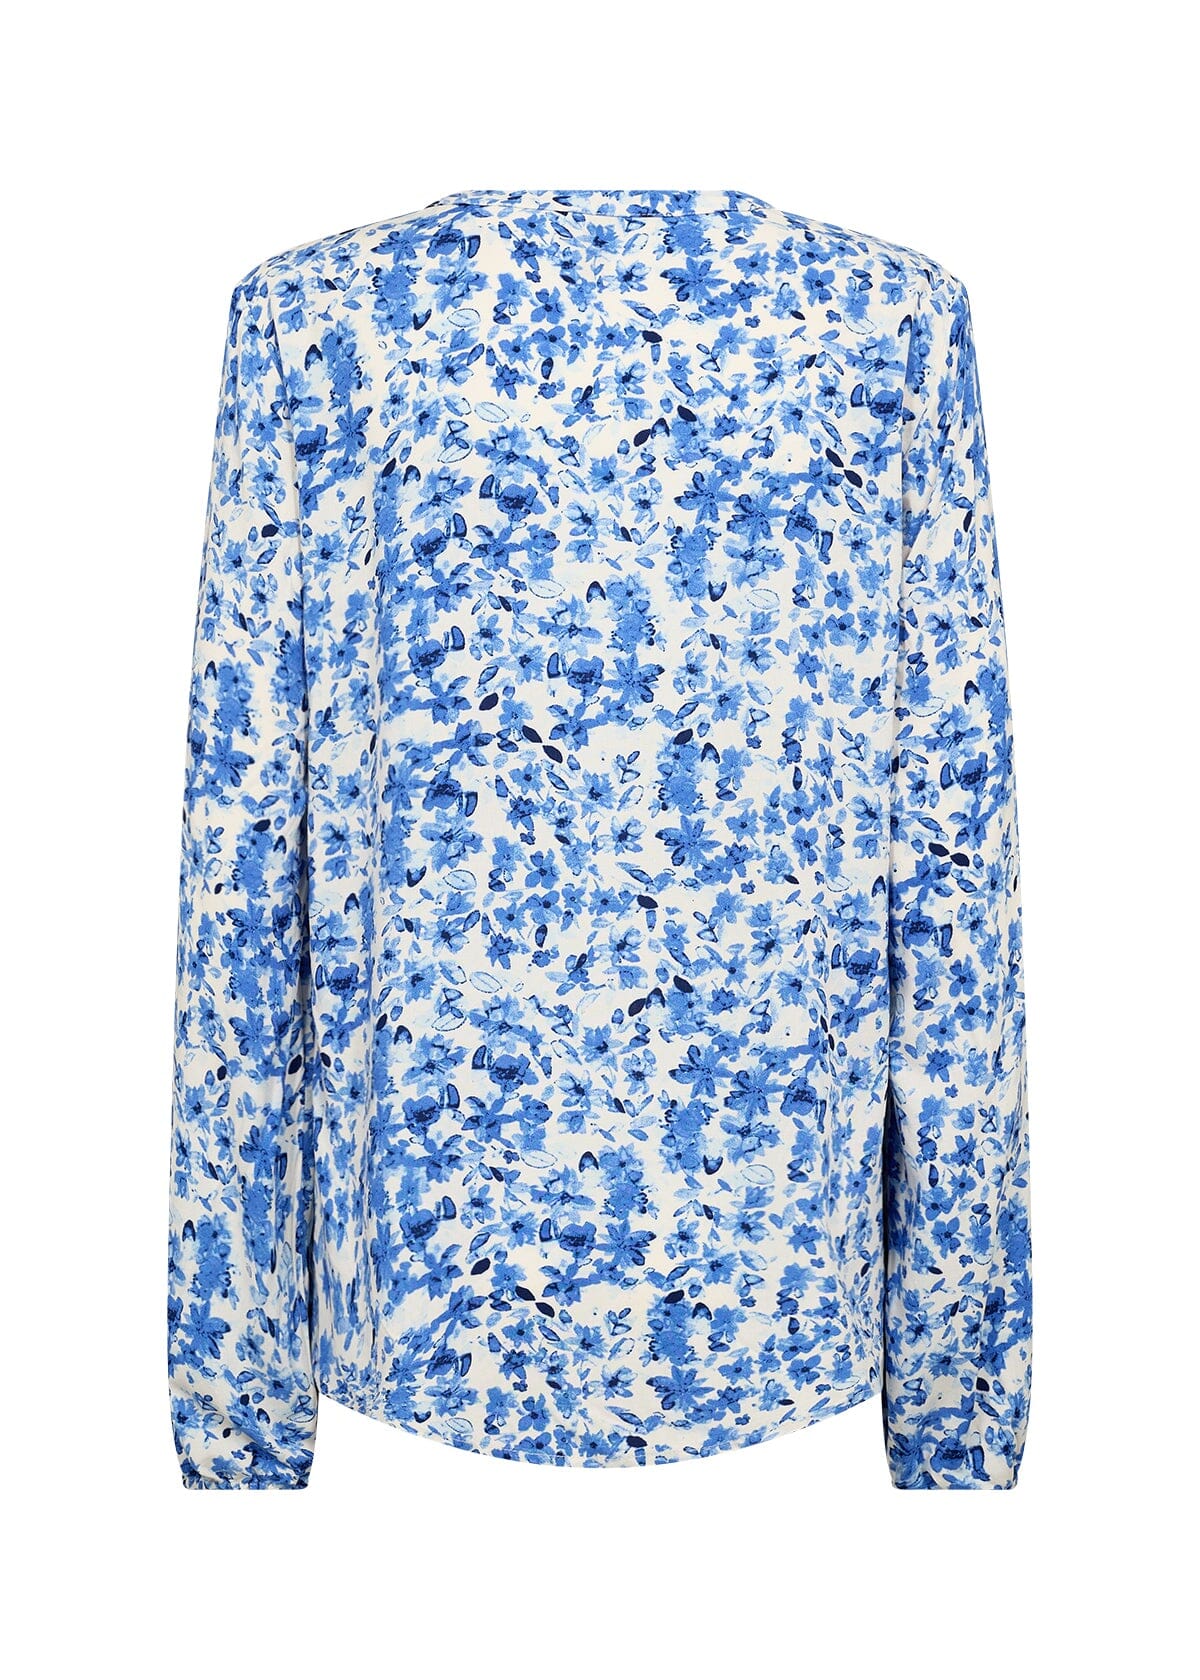 Doha Blouse in Crystal Blue Combi Blouse Soyaconcept 